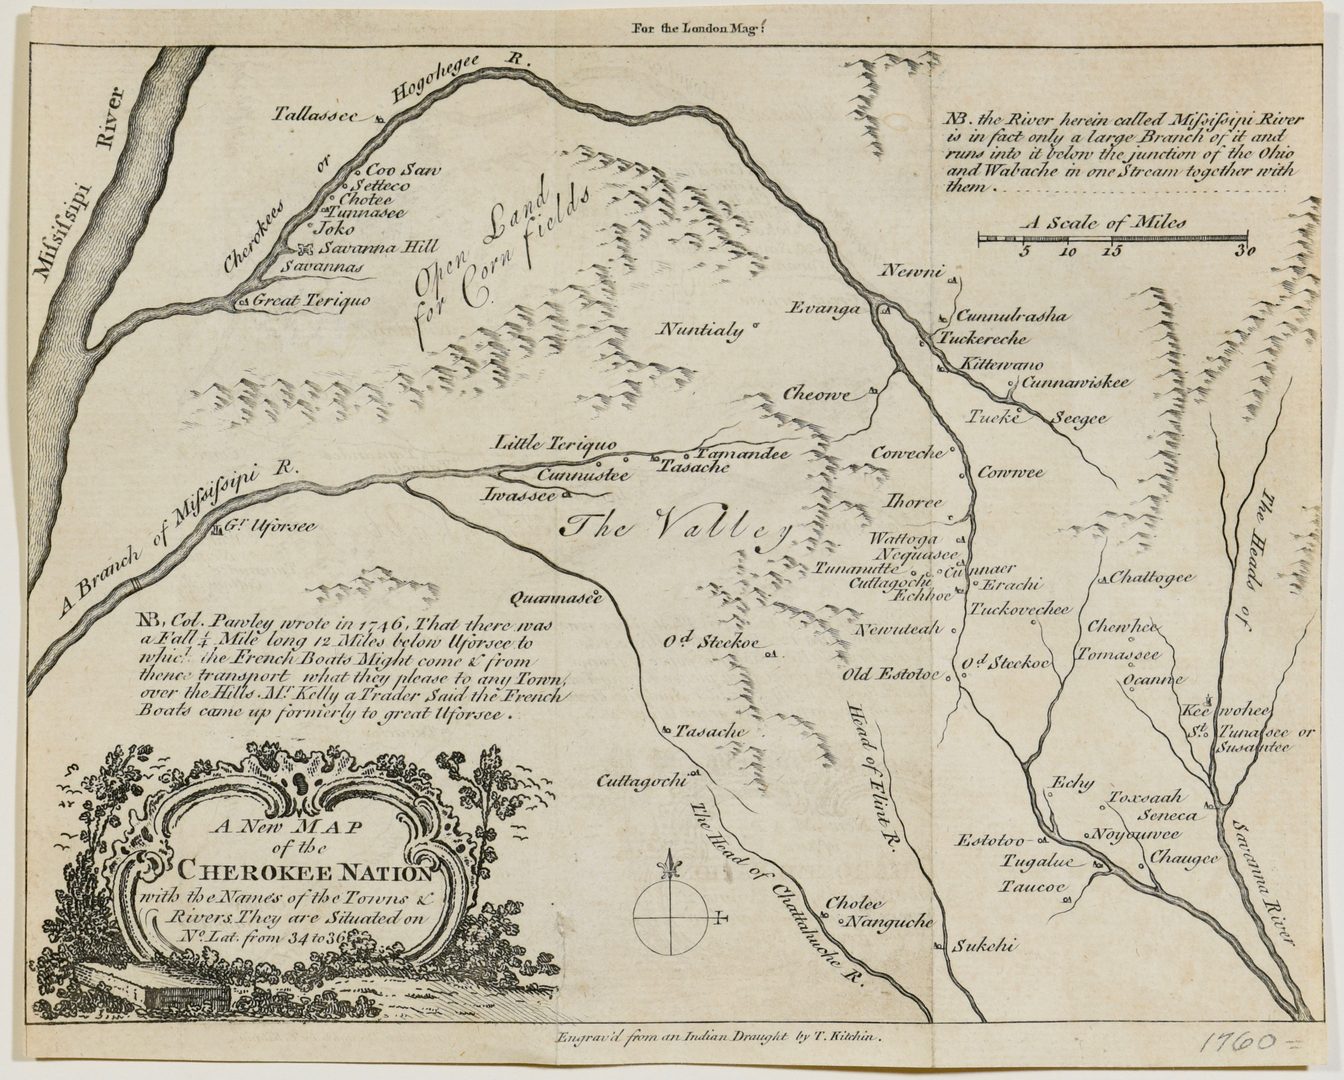 Lot 262: A New Map of the Cherokee Nation, 18th C.